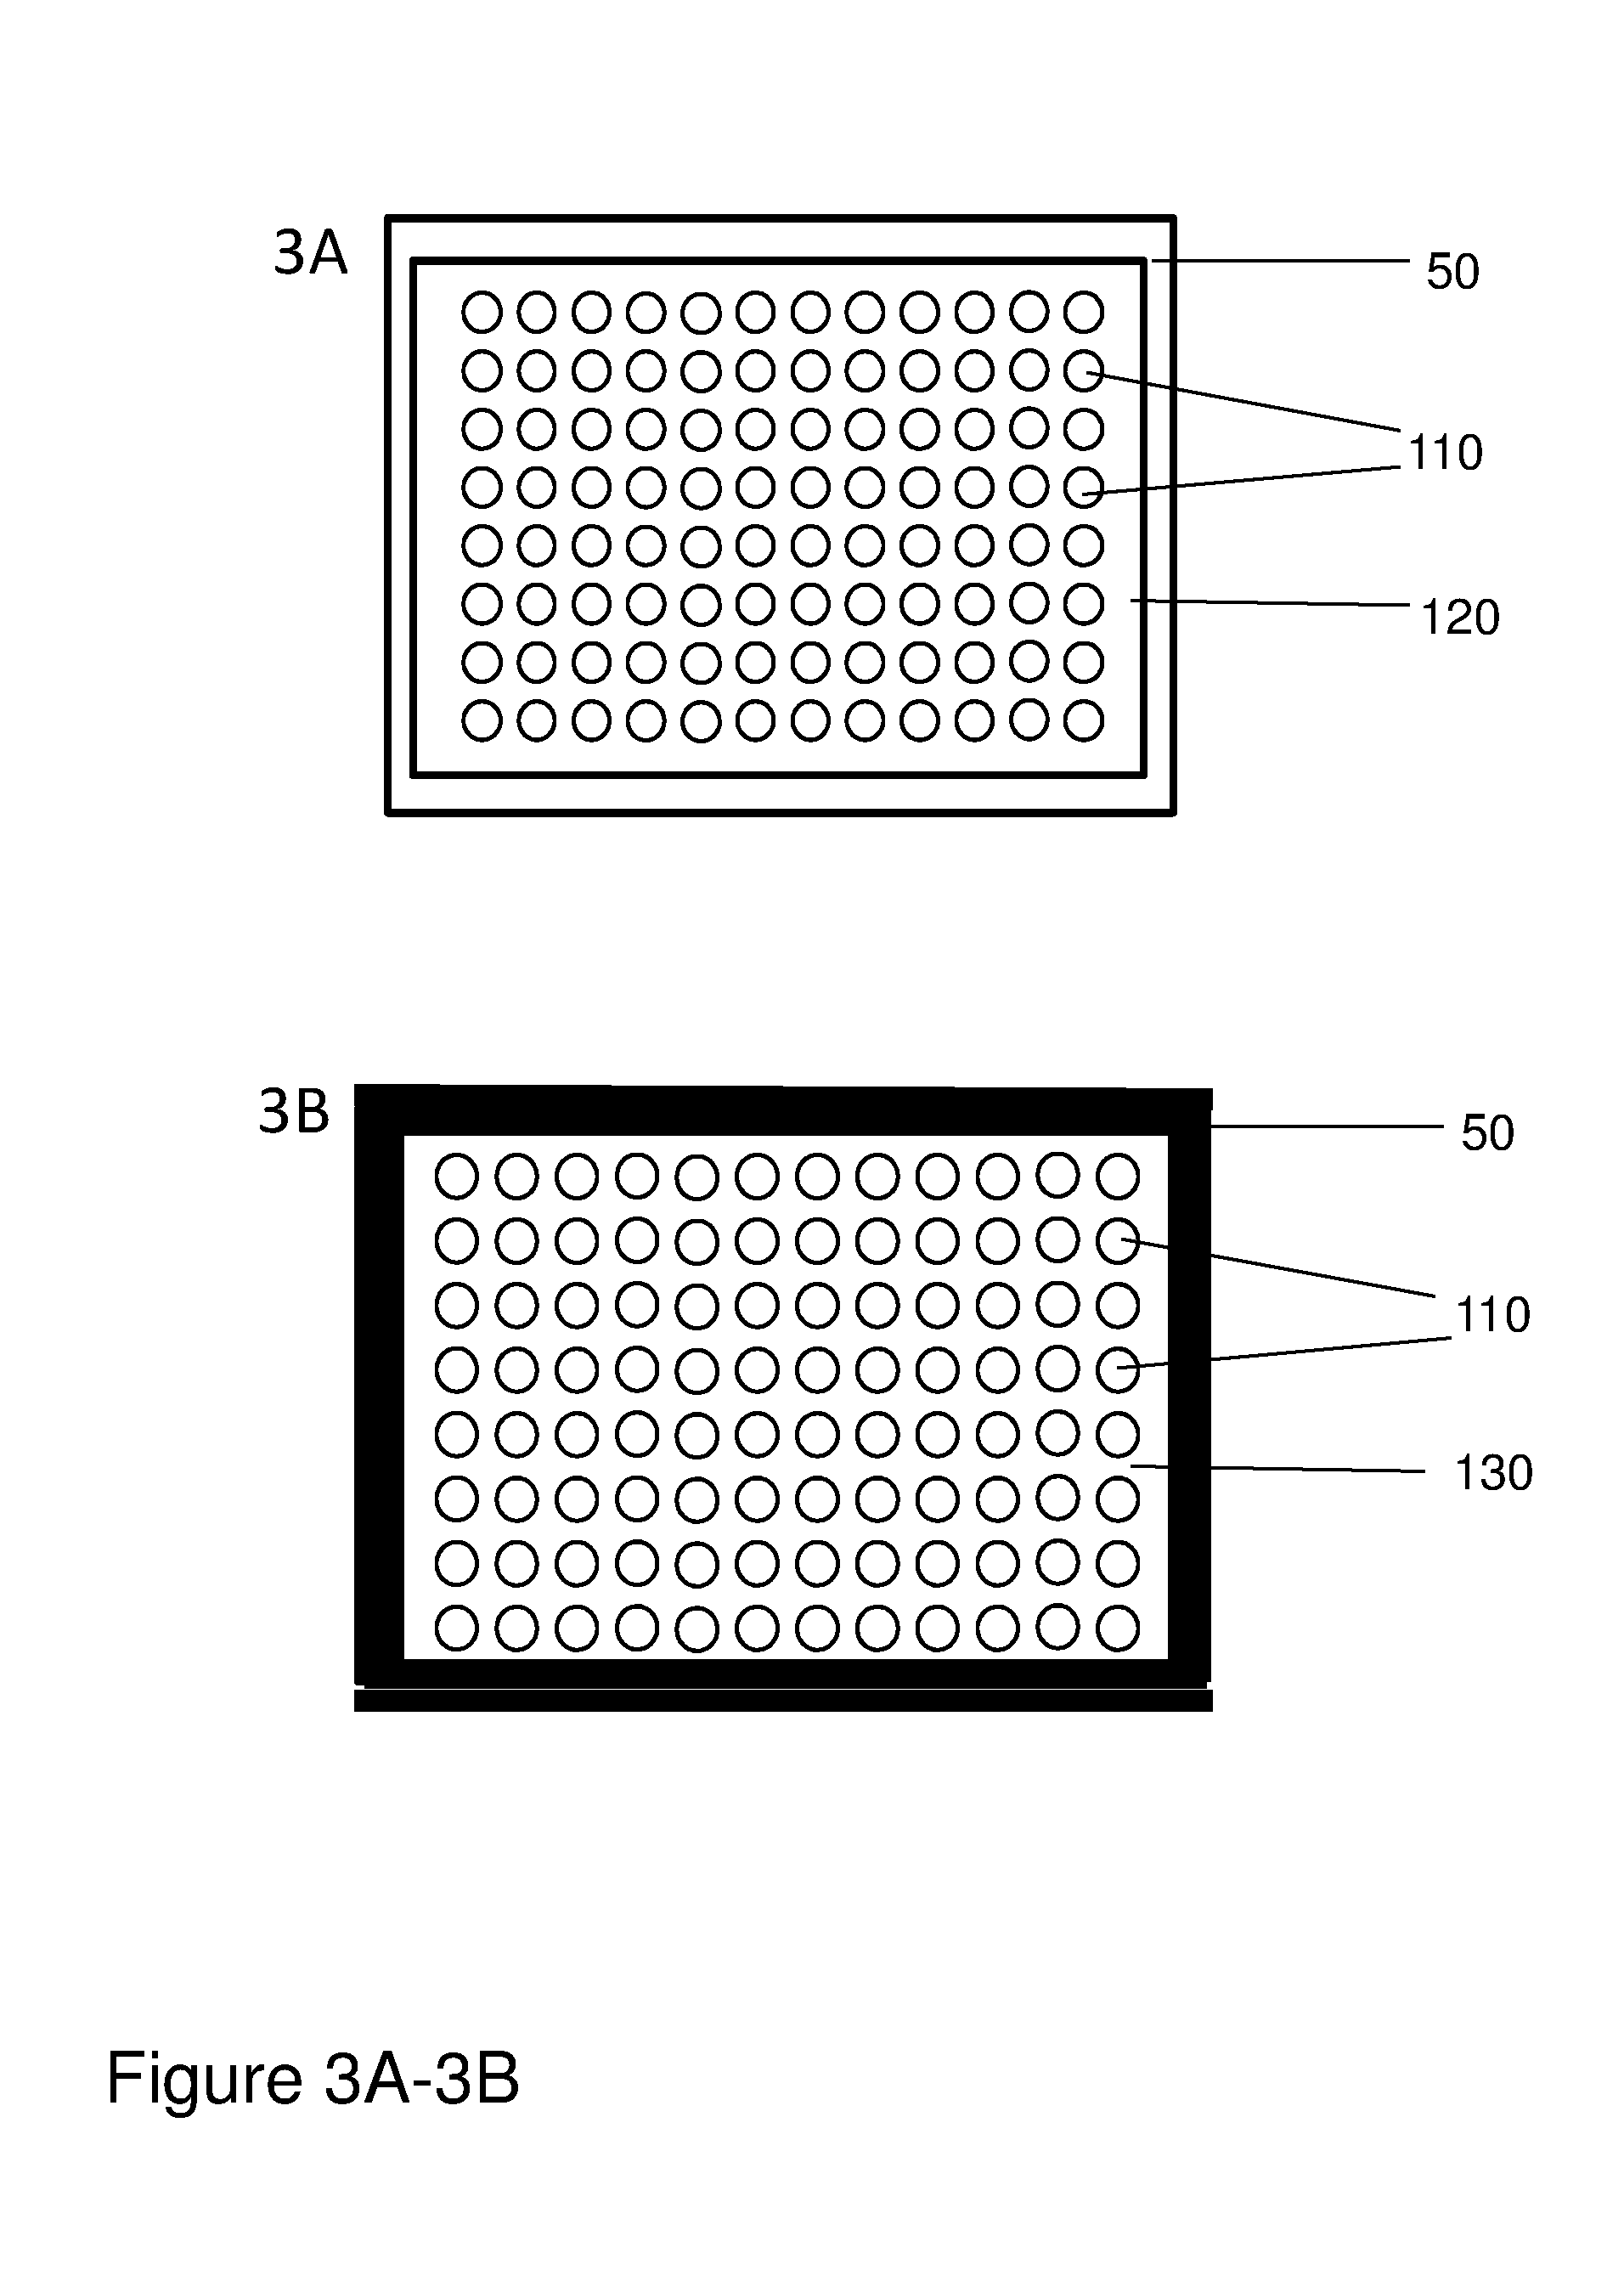 Methods and devices for nucleic acid purification